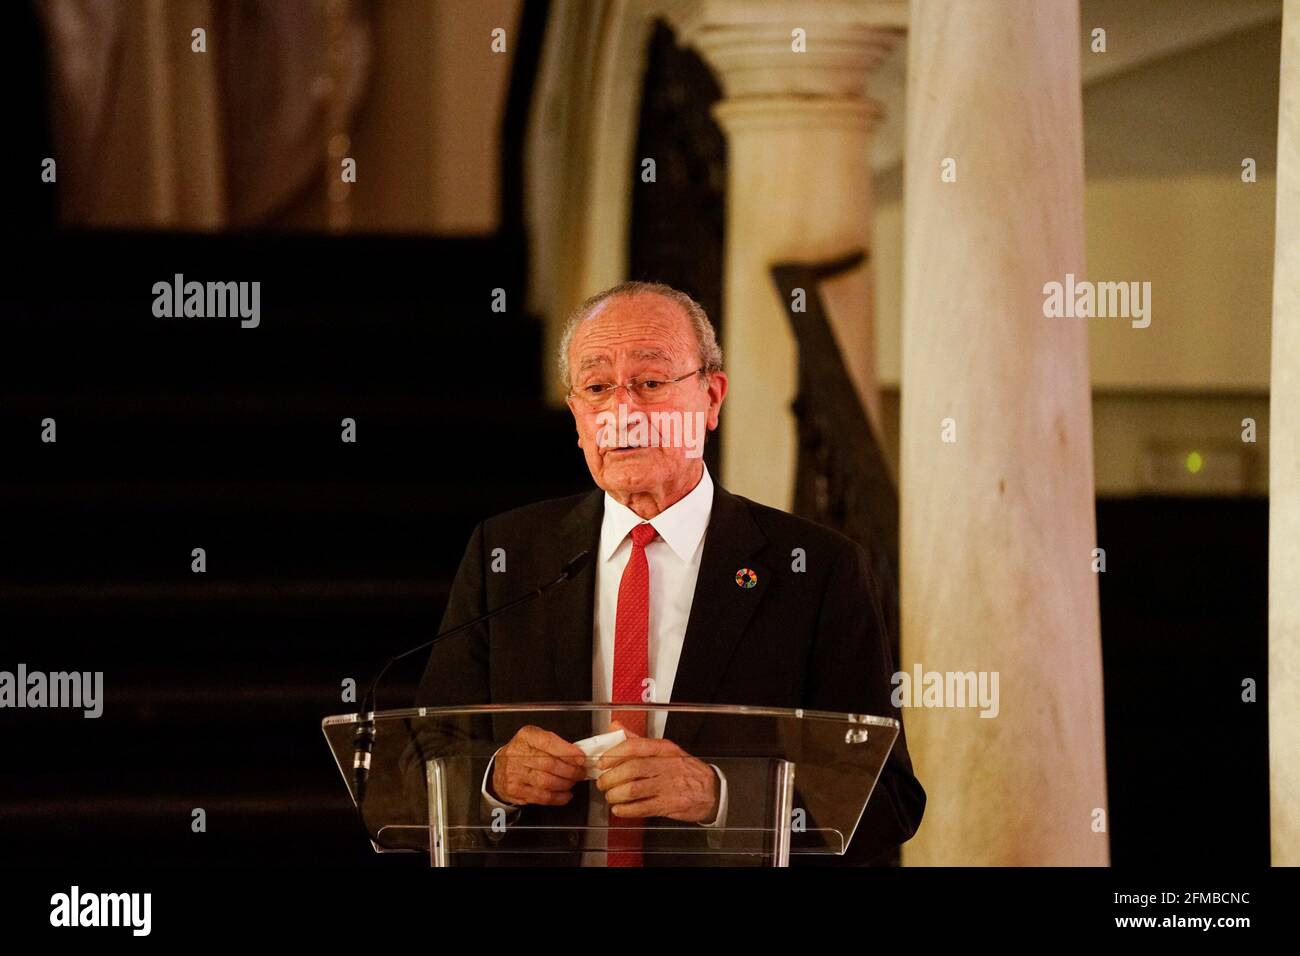 Malaga, Spain. 07th May, 2021. Mayor of Malaga, Francisco de la Torre Prados seen speaking during the exhibition at Centro Cultural Fundacion Unicaja. 'Un siglo de esplendor' is an exhibition that shows the artistic heritage of the Holy Week brotherhoods of Malaga and is one of the events organized by Agrupacion de Cofradias de Semana Santa de Malaga for the centenary of the institution. (Photo by Francis Gonzalez/SOPA Images/Sipa USA) Credit: Sipa USA/Alamy Live News Stock Photo